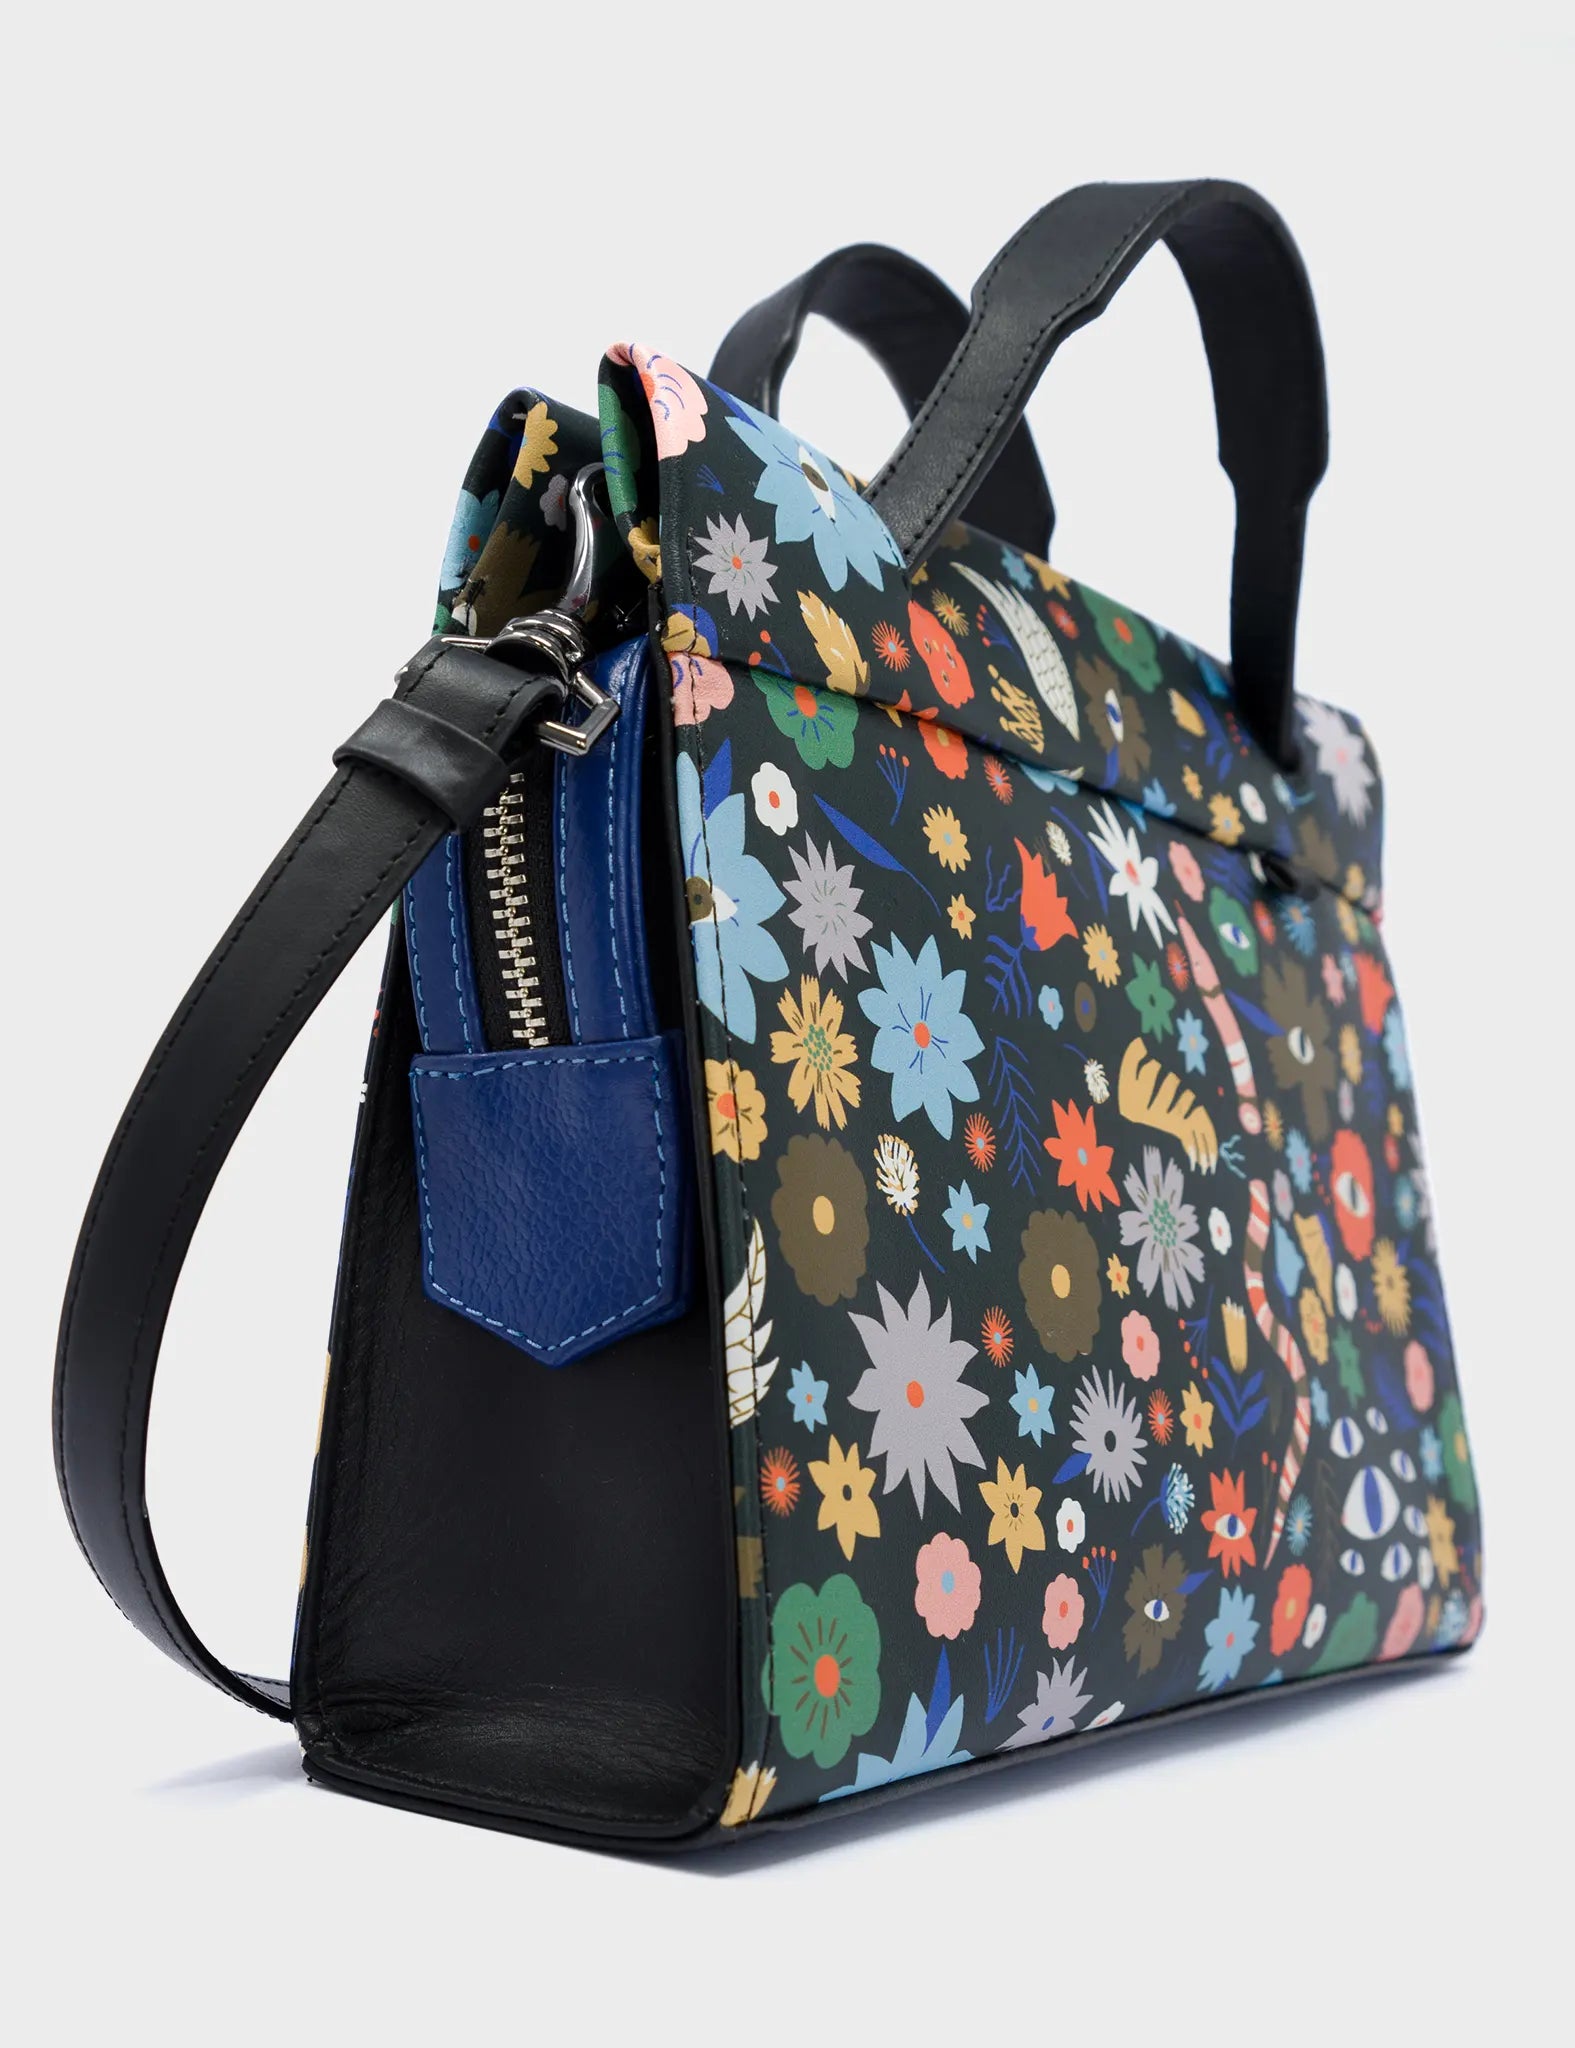 Crossbody Small Black Leather Bag - Floral Pattern Print - Side 